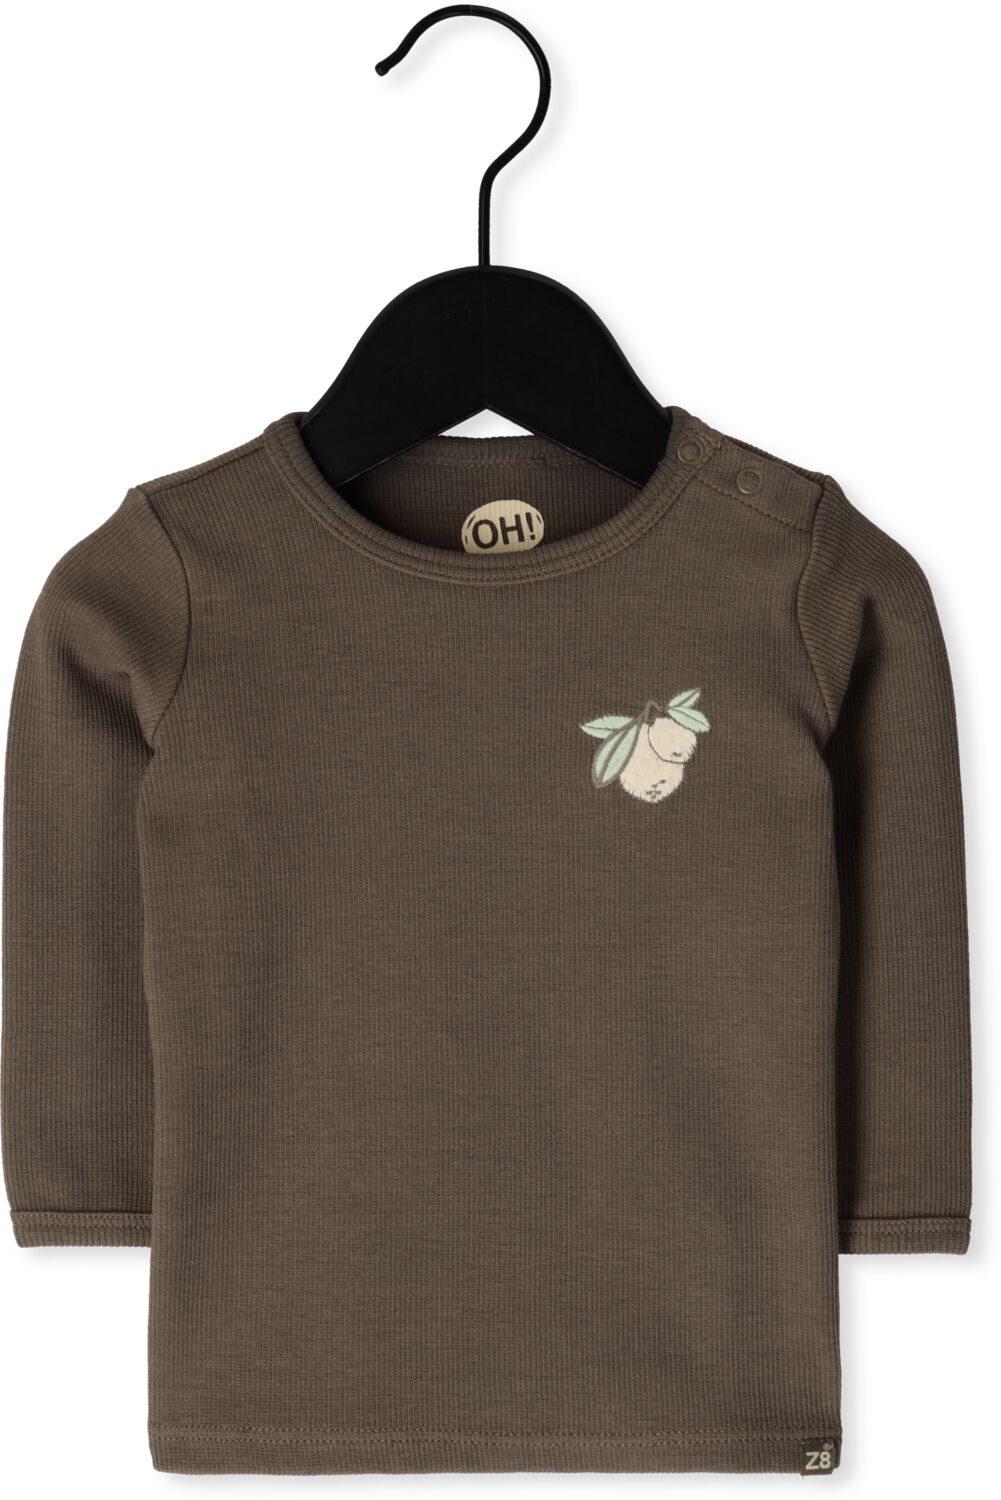 Z8 Baby Tops & T-shirts Julio Taupe .0